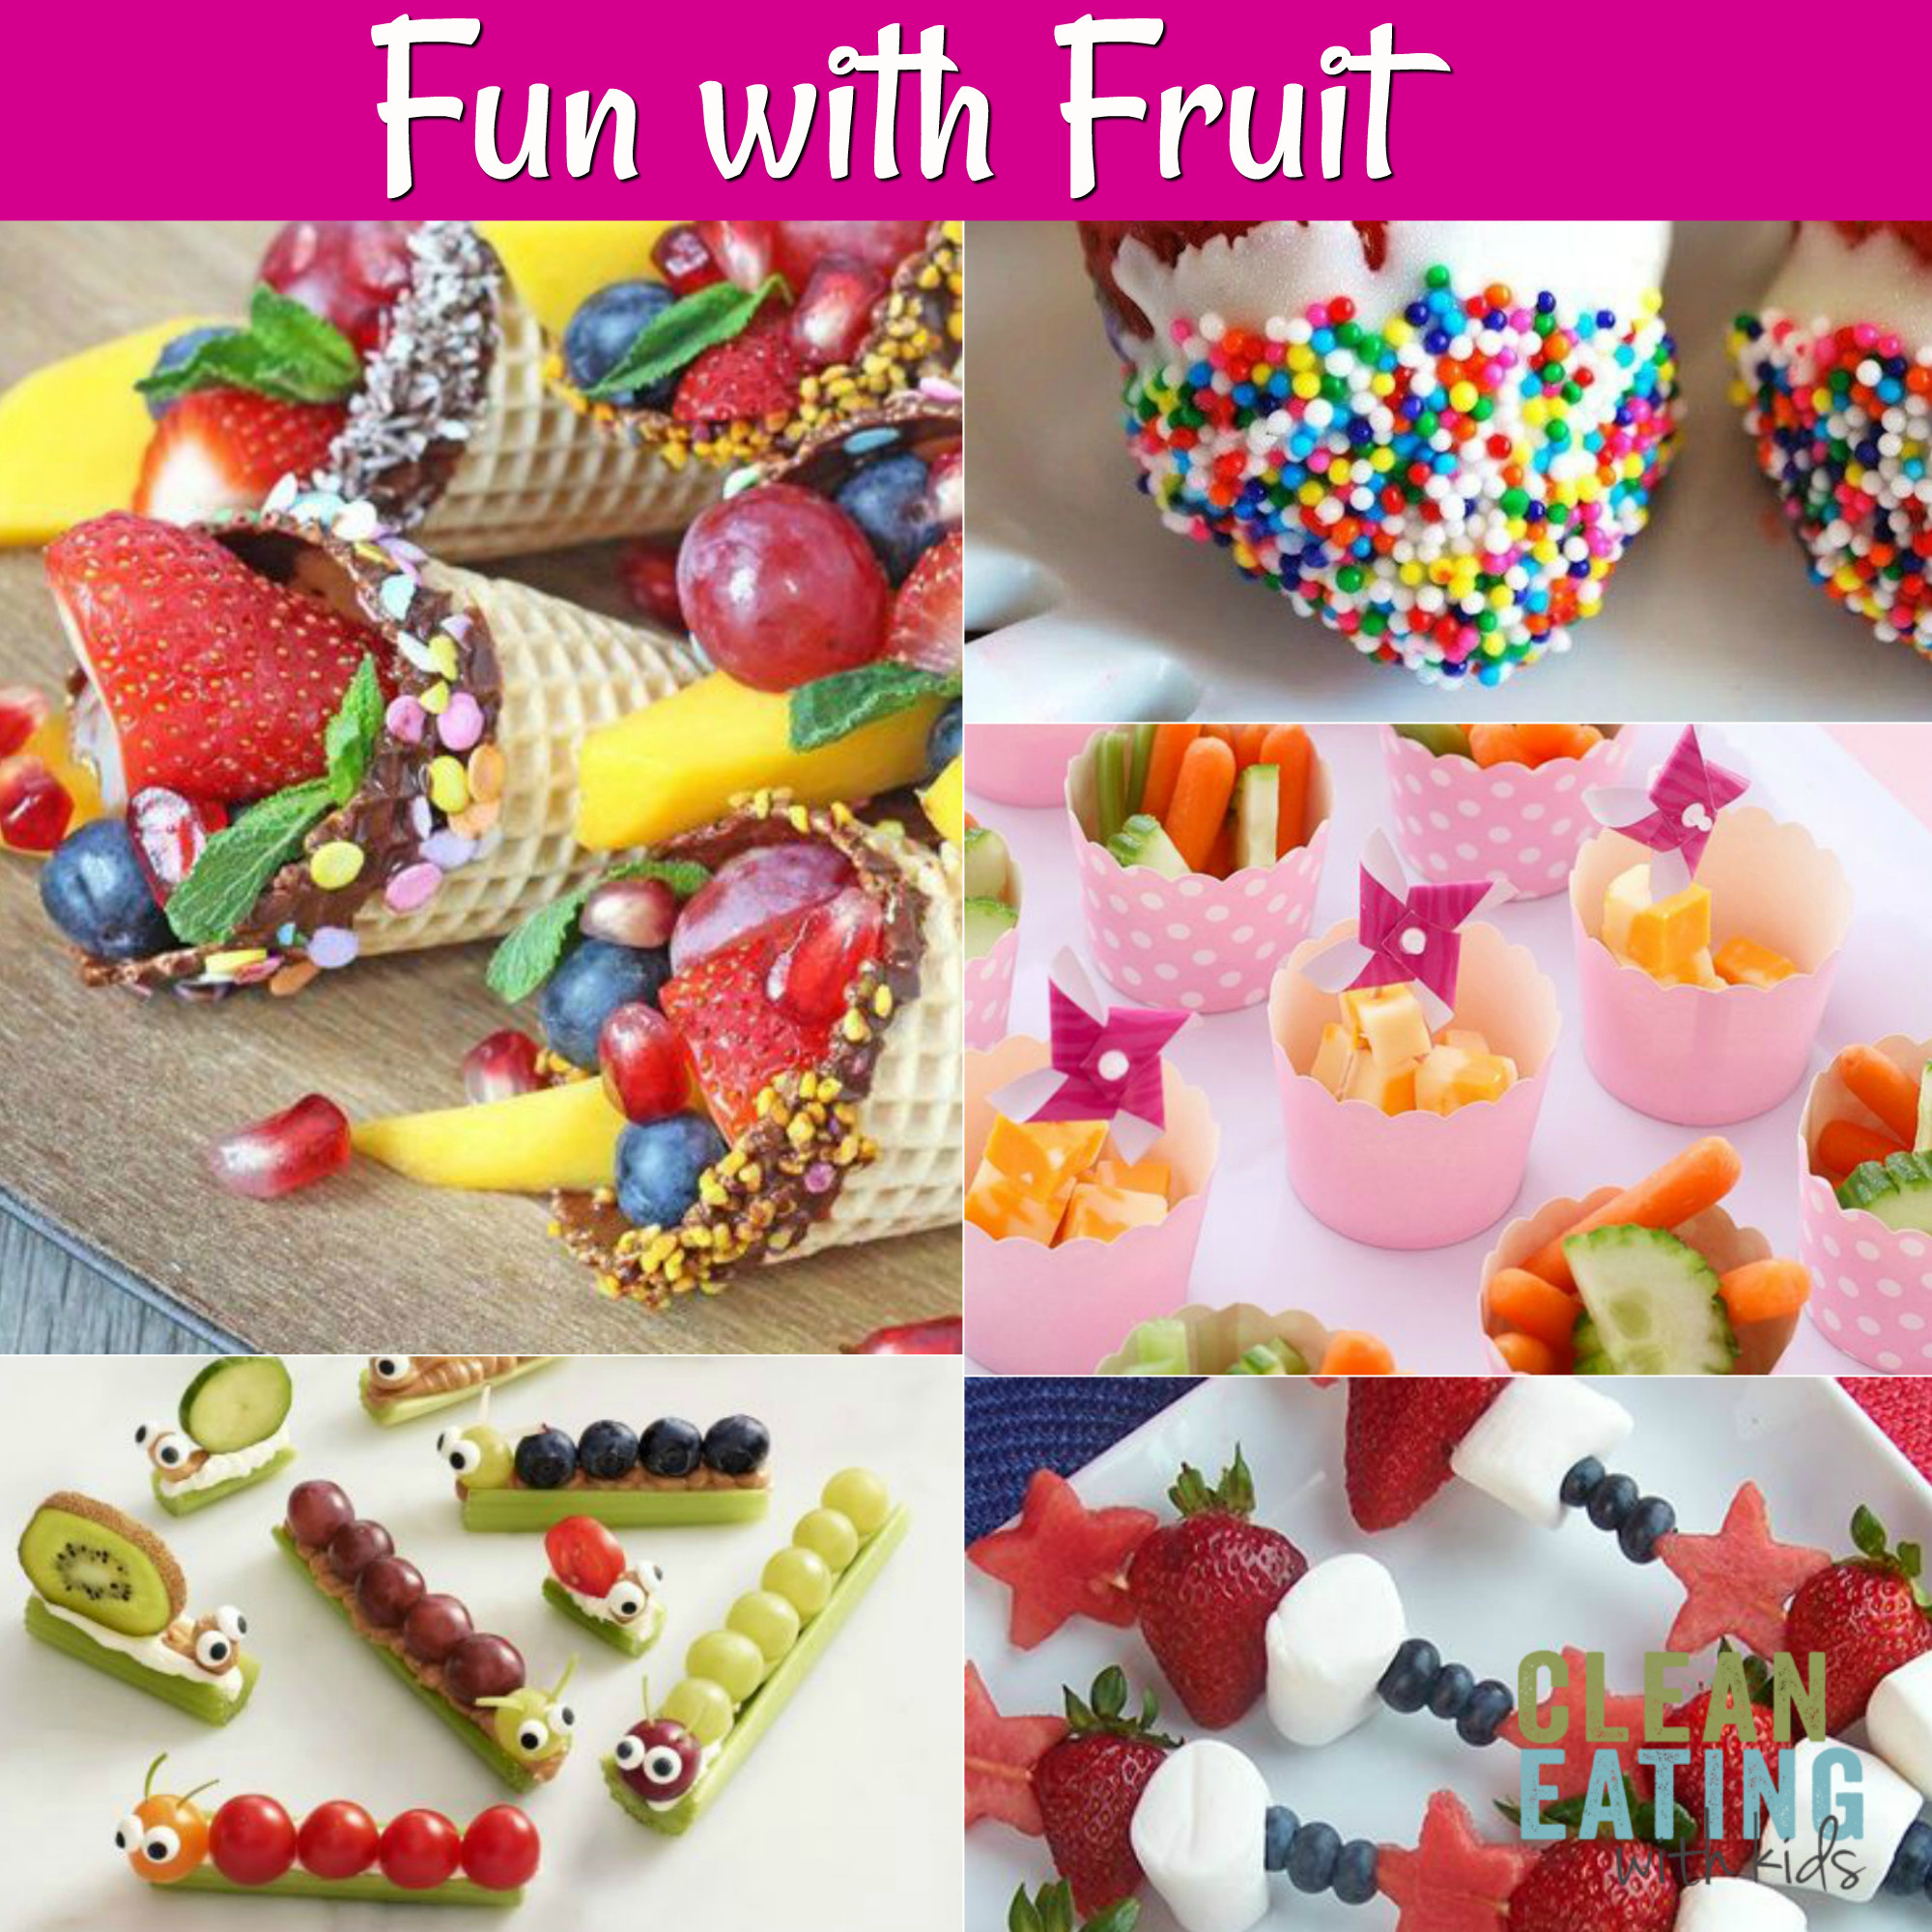 Kids Birthday Party Snacks
 25 Healthy Birthday Party Food Ideas Clean Eating with kids